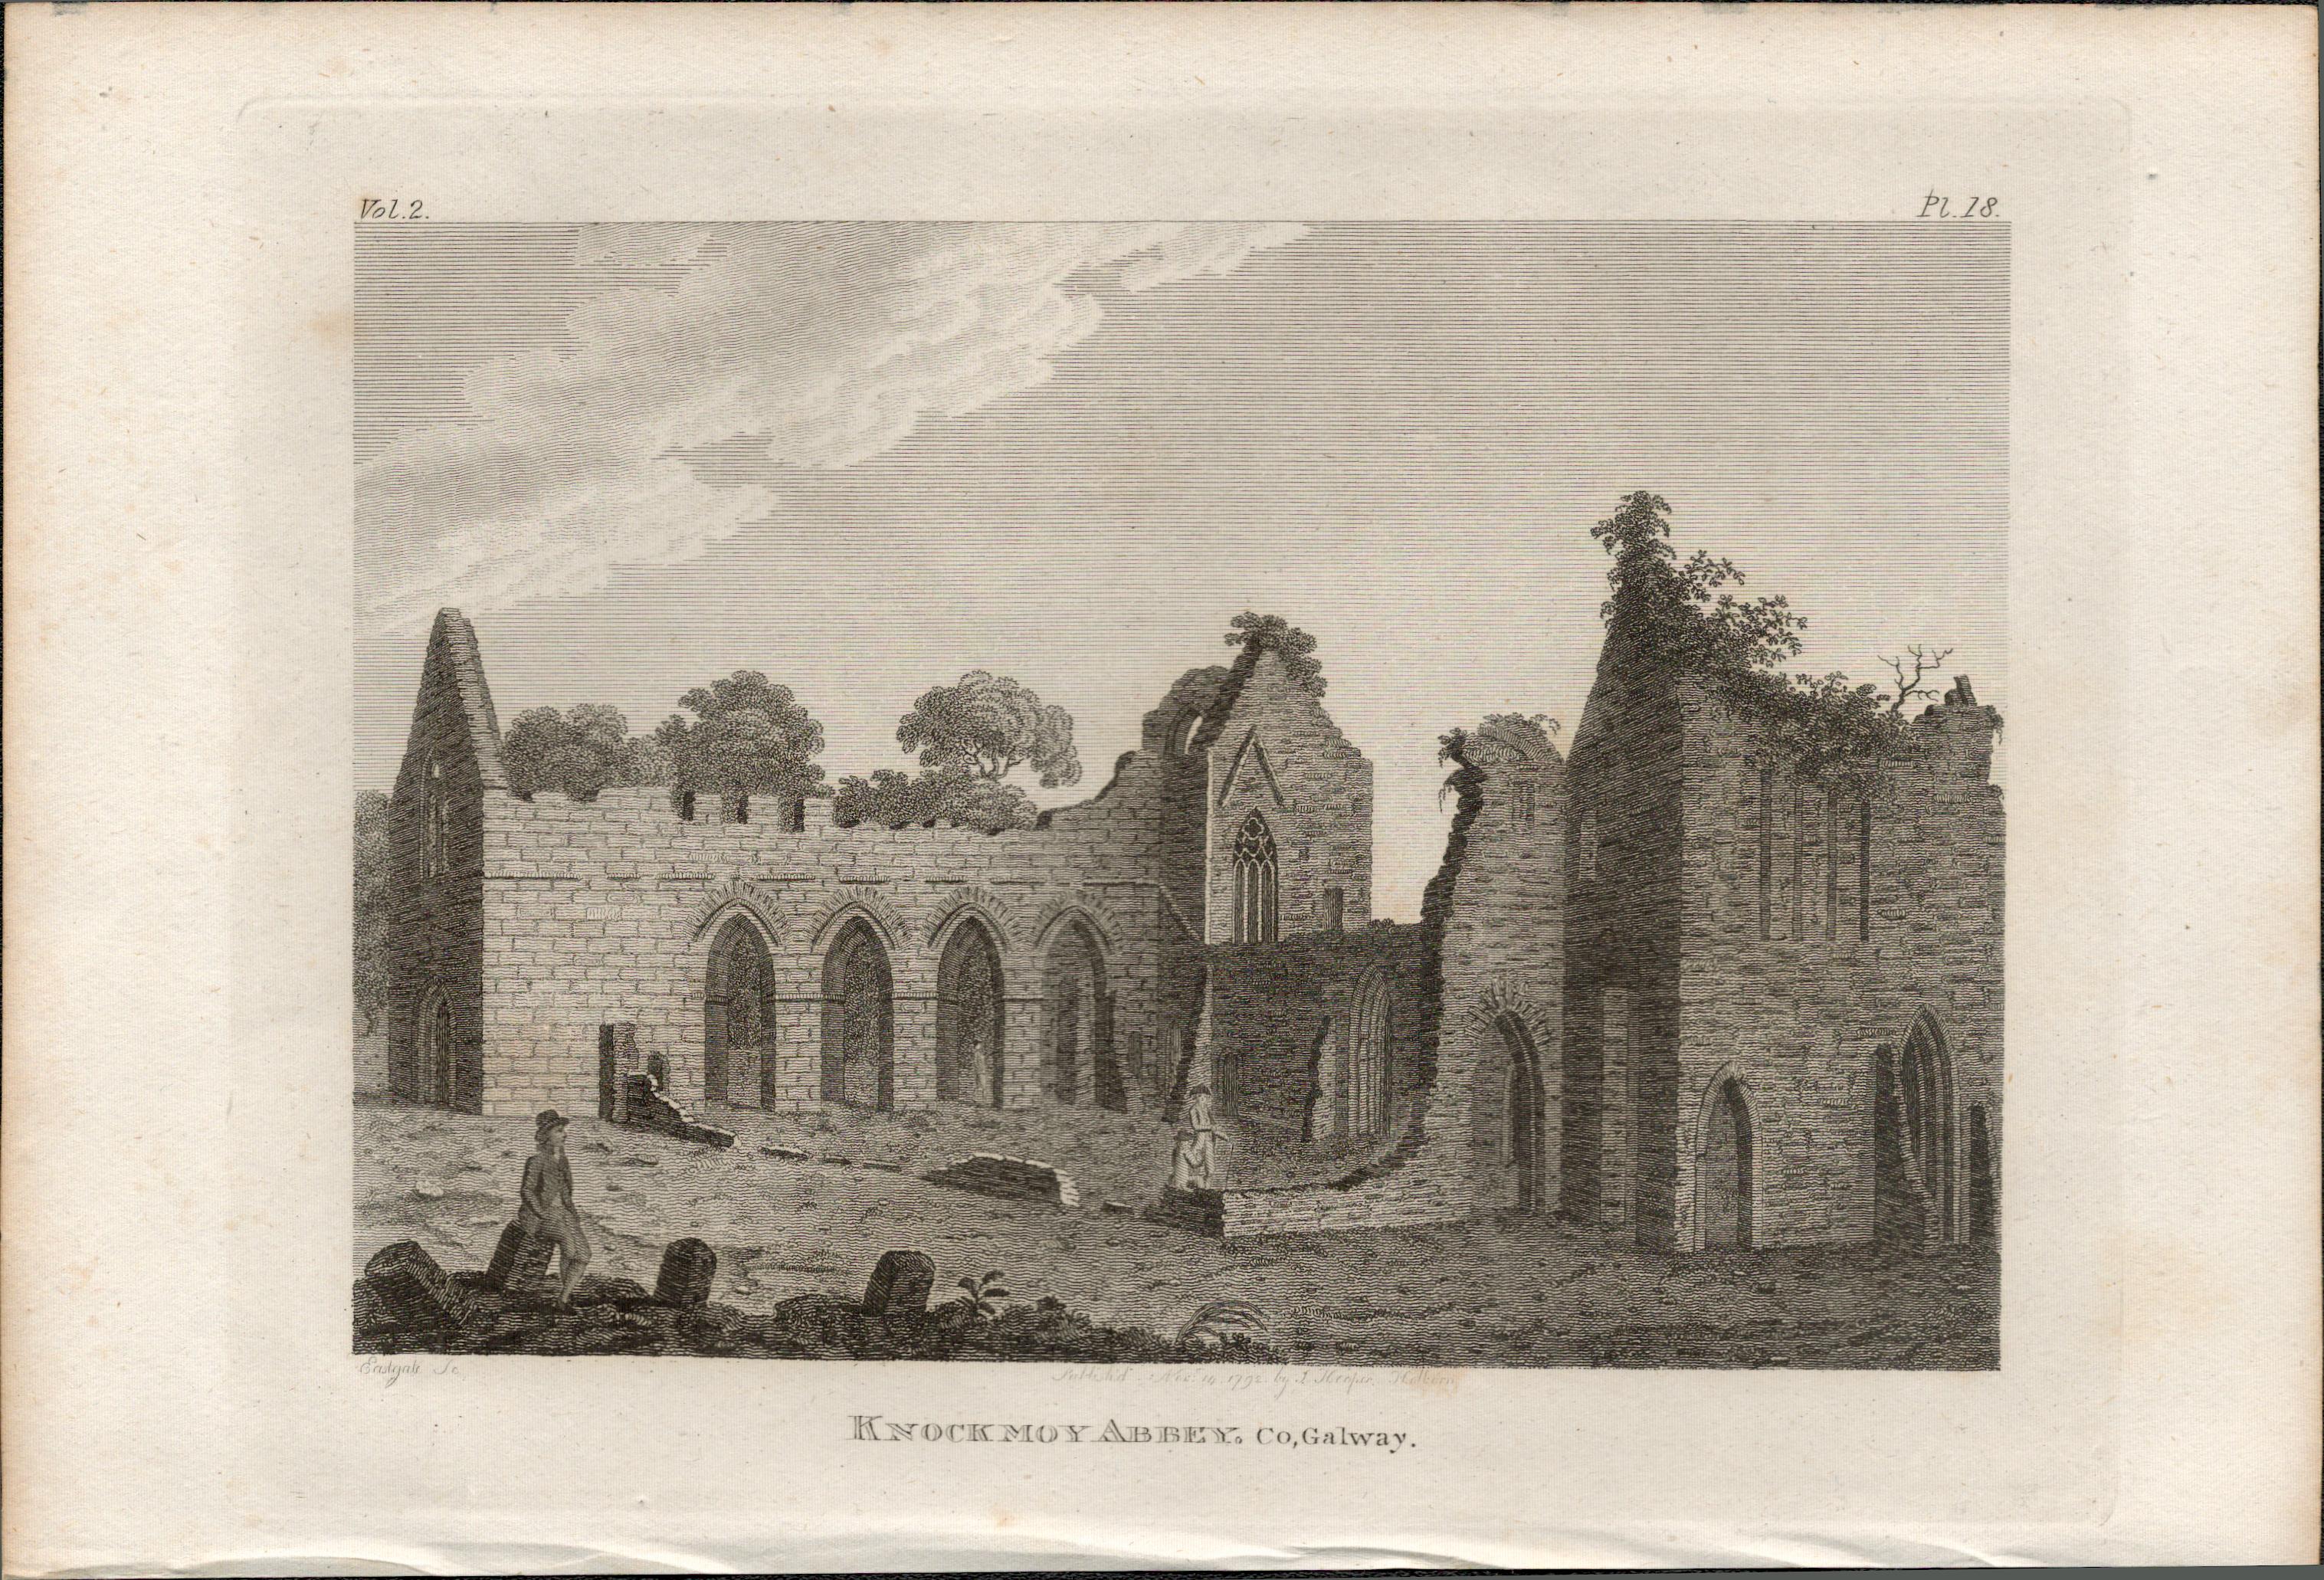 Knockmoy Abbey Co Galway Rare 1791 Francis Grose Antique Print.